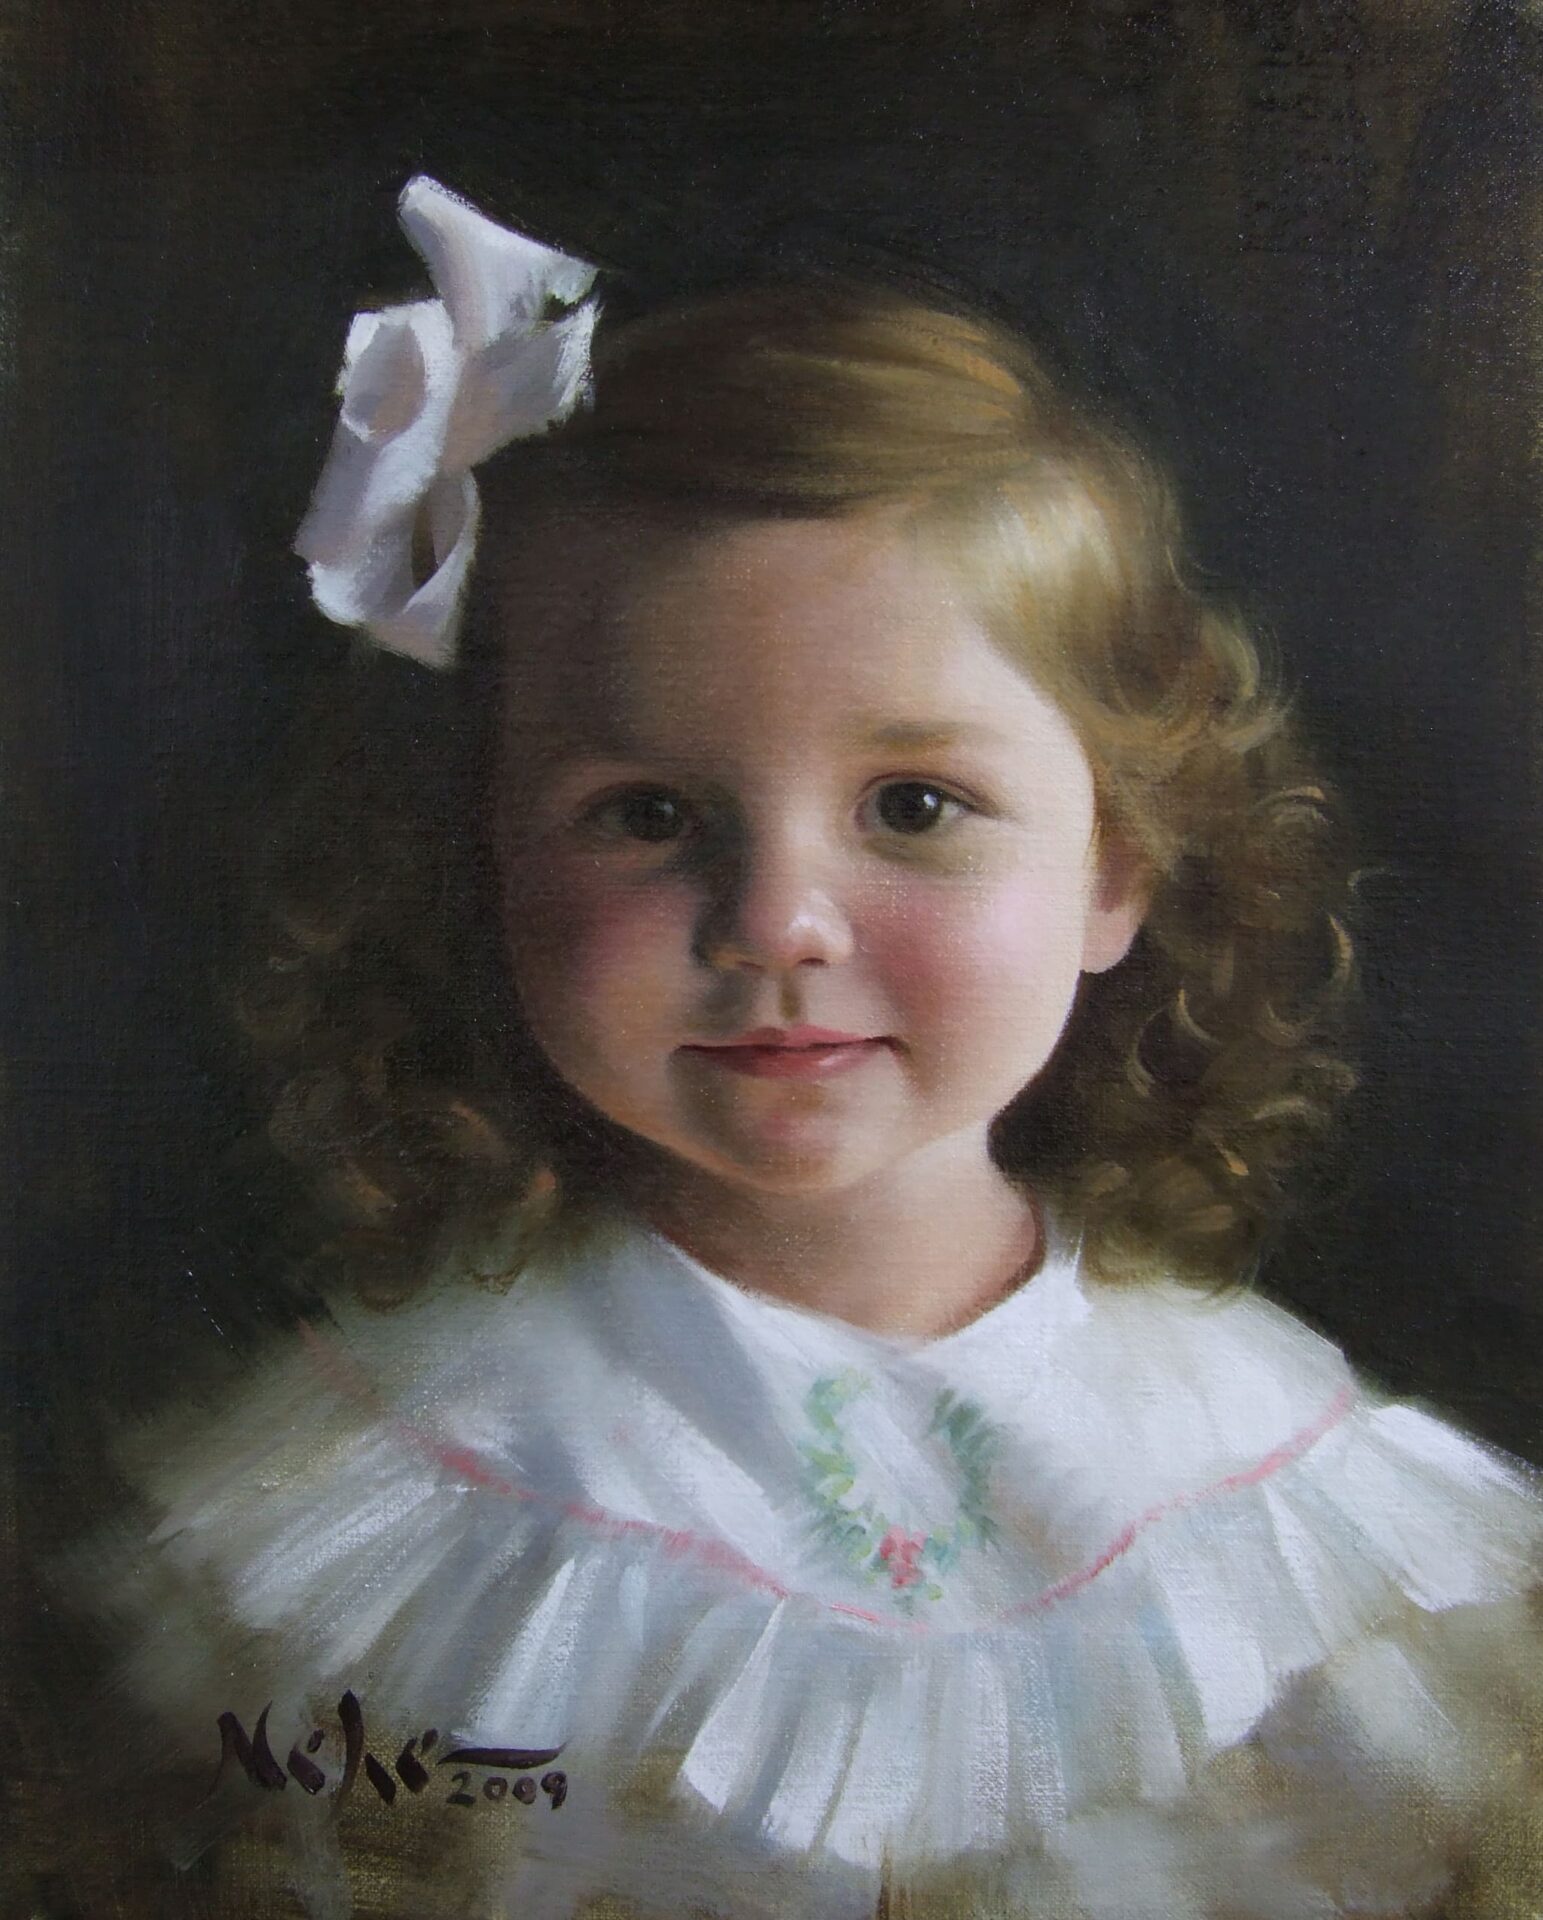 Little Girl with white dress